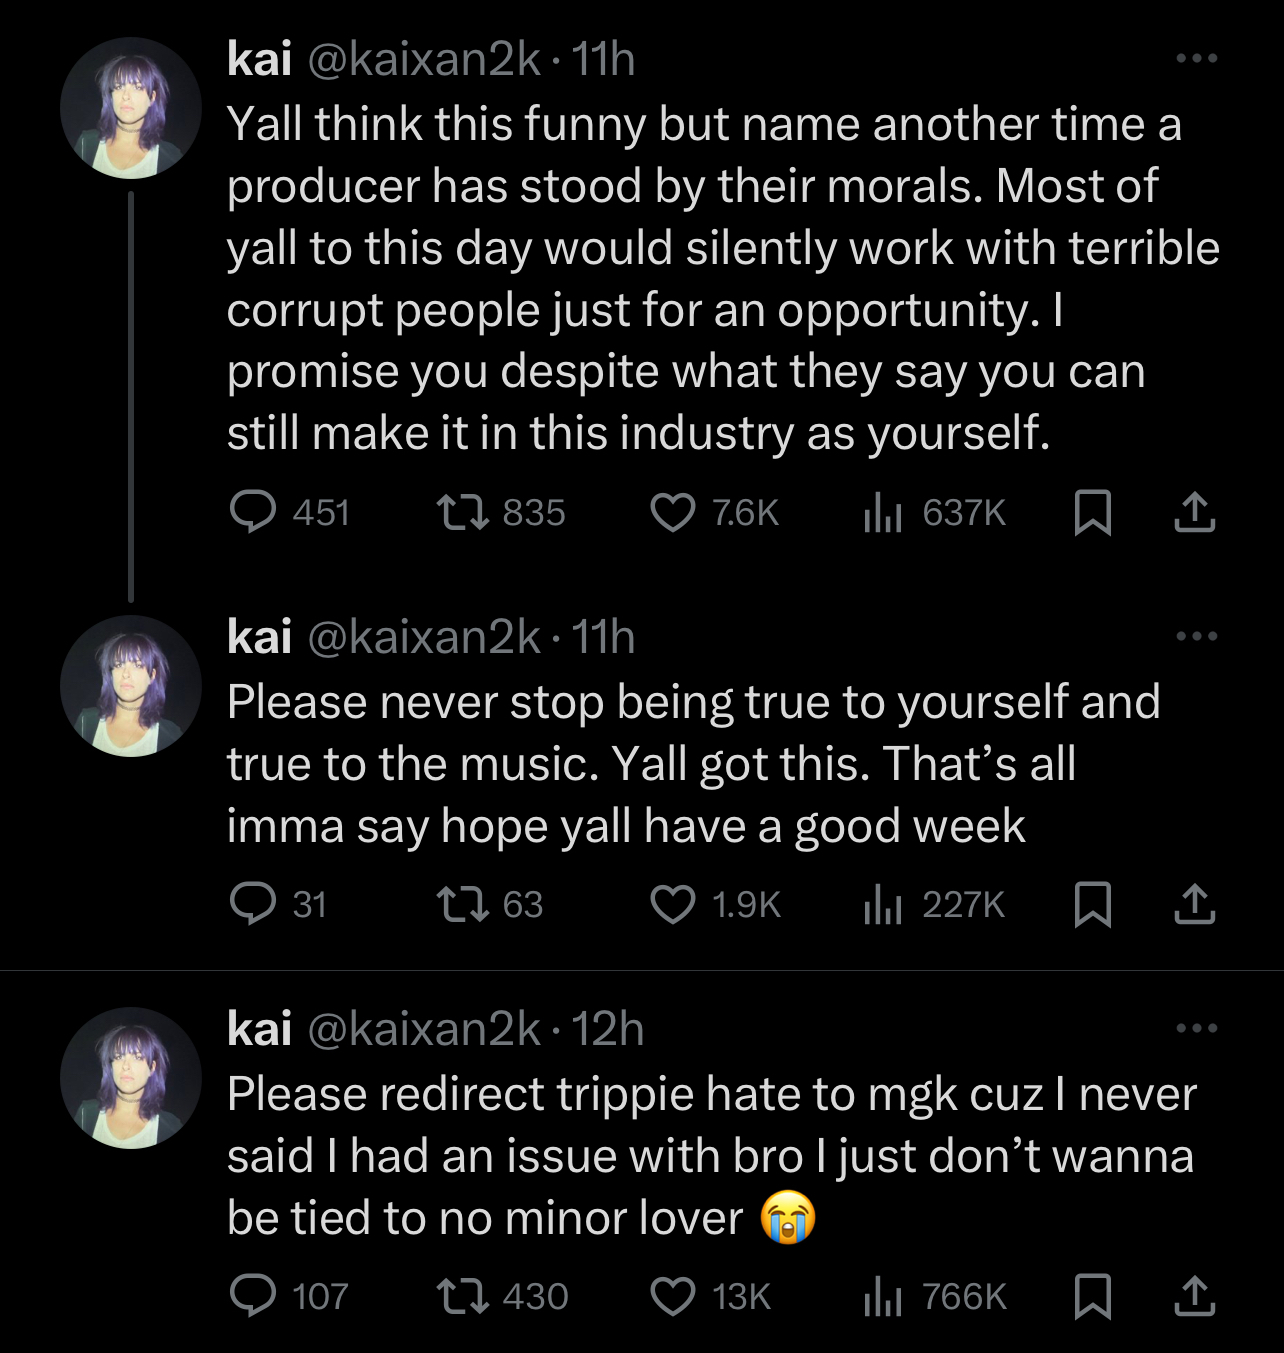 Two tweets by user kai with messages promoting positivity and redirection of negativity